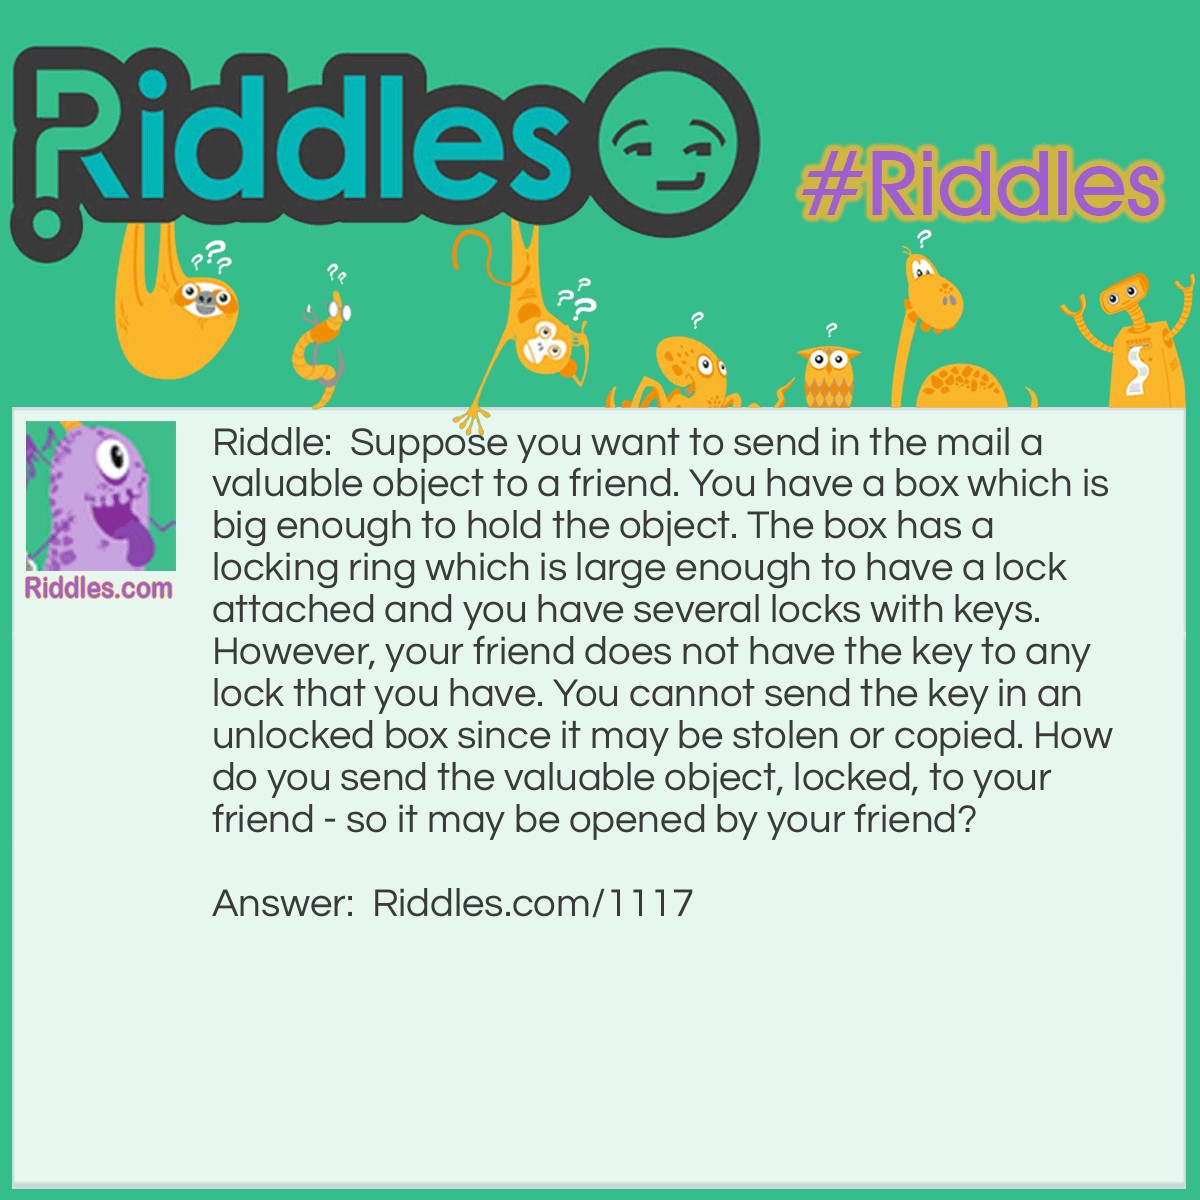 Riddle: Suppose you want to send in the mail a valuable object to a friend. You have a box which is big enough to hold the object. The box has a locking ring which is large enough to have a lock attached and you have several locks with keys. However, your friend does not have the key to any lock that you have. You cannot send the key in an unlocked box since it may be stolen or copied. How do you send the valuable object, locked, to your friend - so it may be opened by your friend?   Answer: Send the box with a lock attached and locked. Your friend attaches his or her own lock and sends the box back to you. You remove your lock and send it back to your friend. Your friend may then remove the lock she or he put on and open the box.